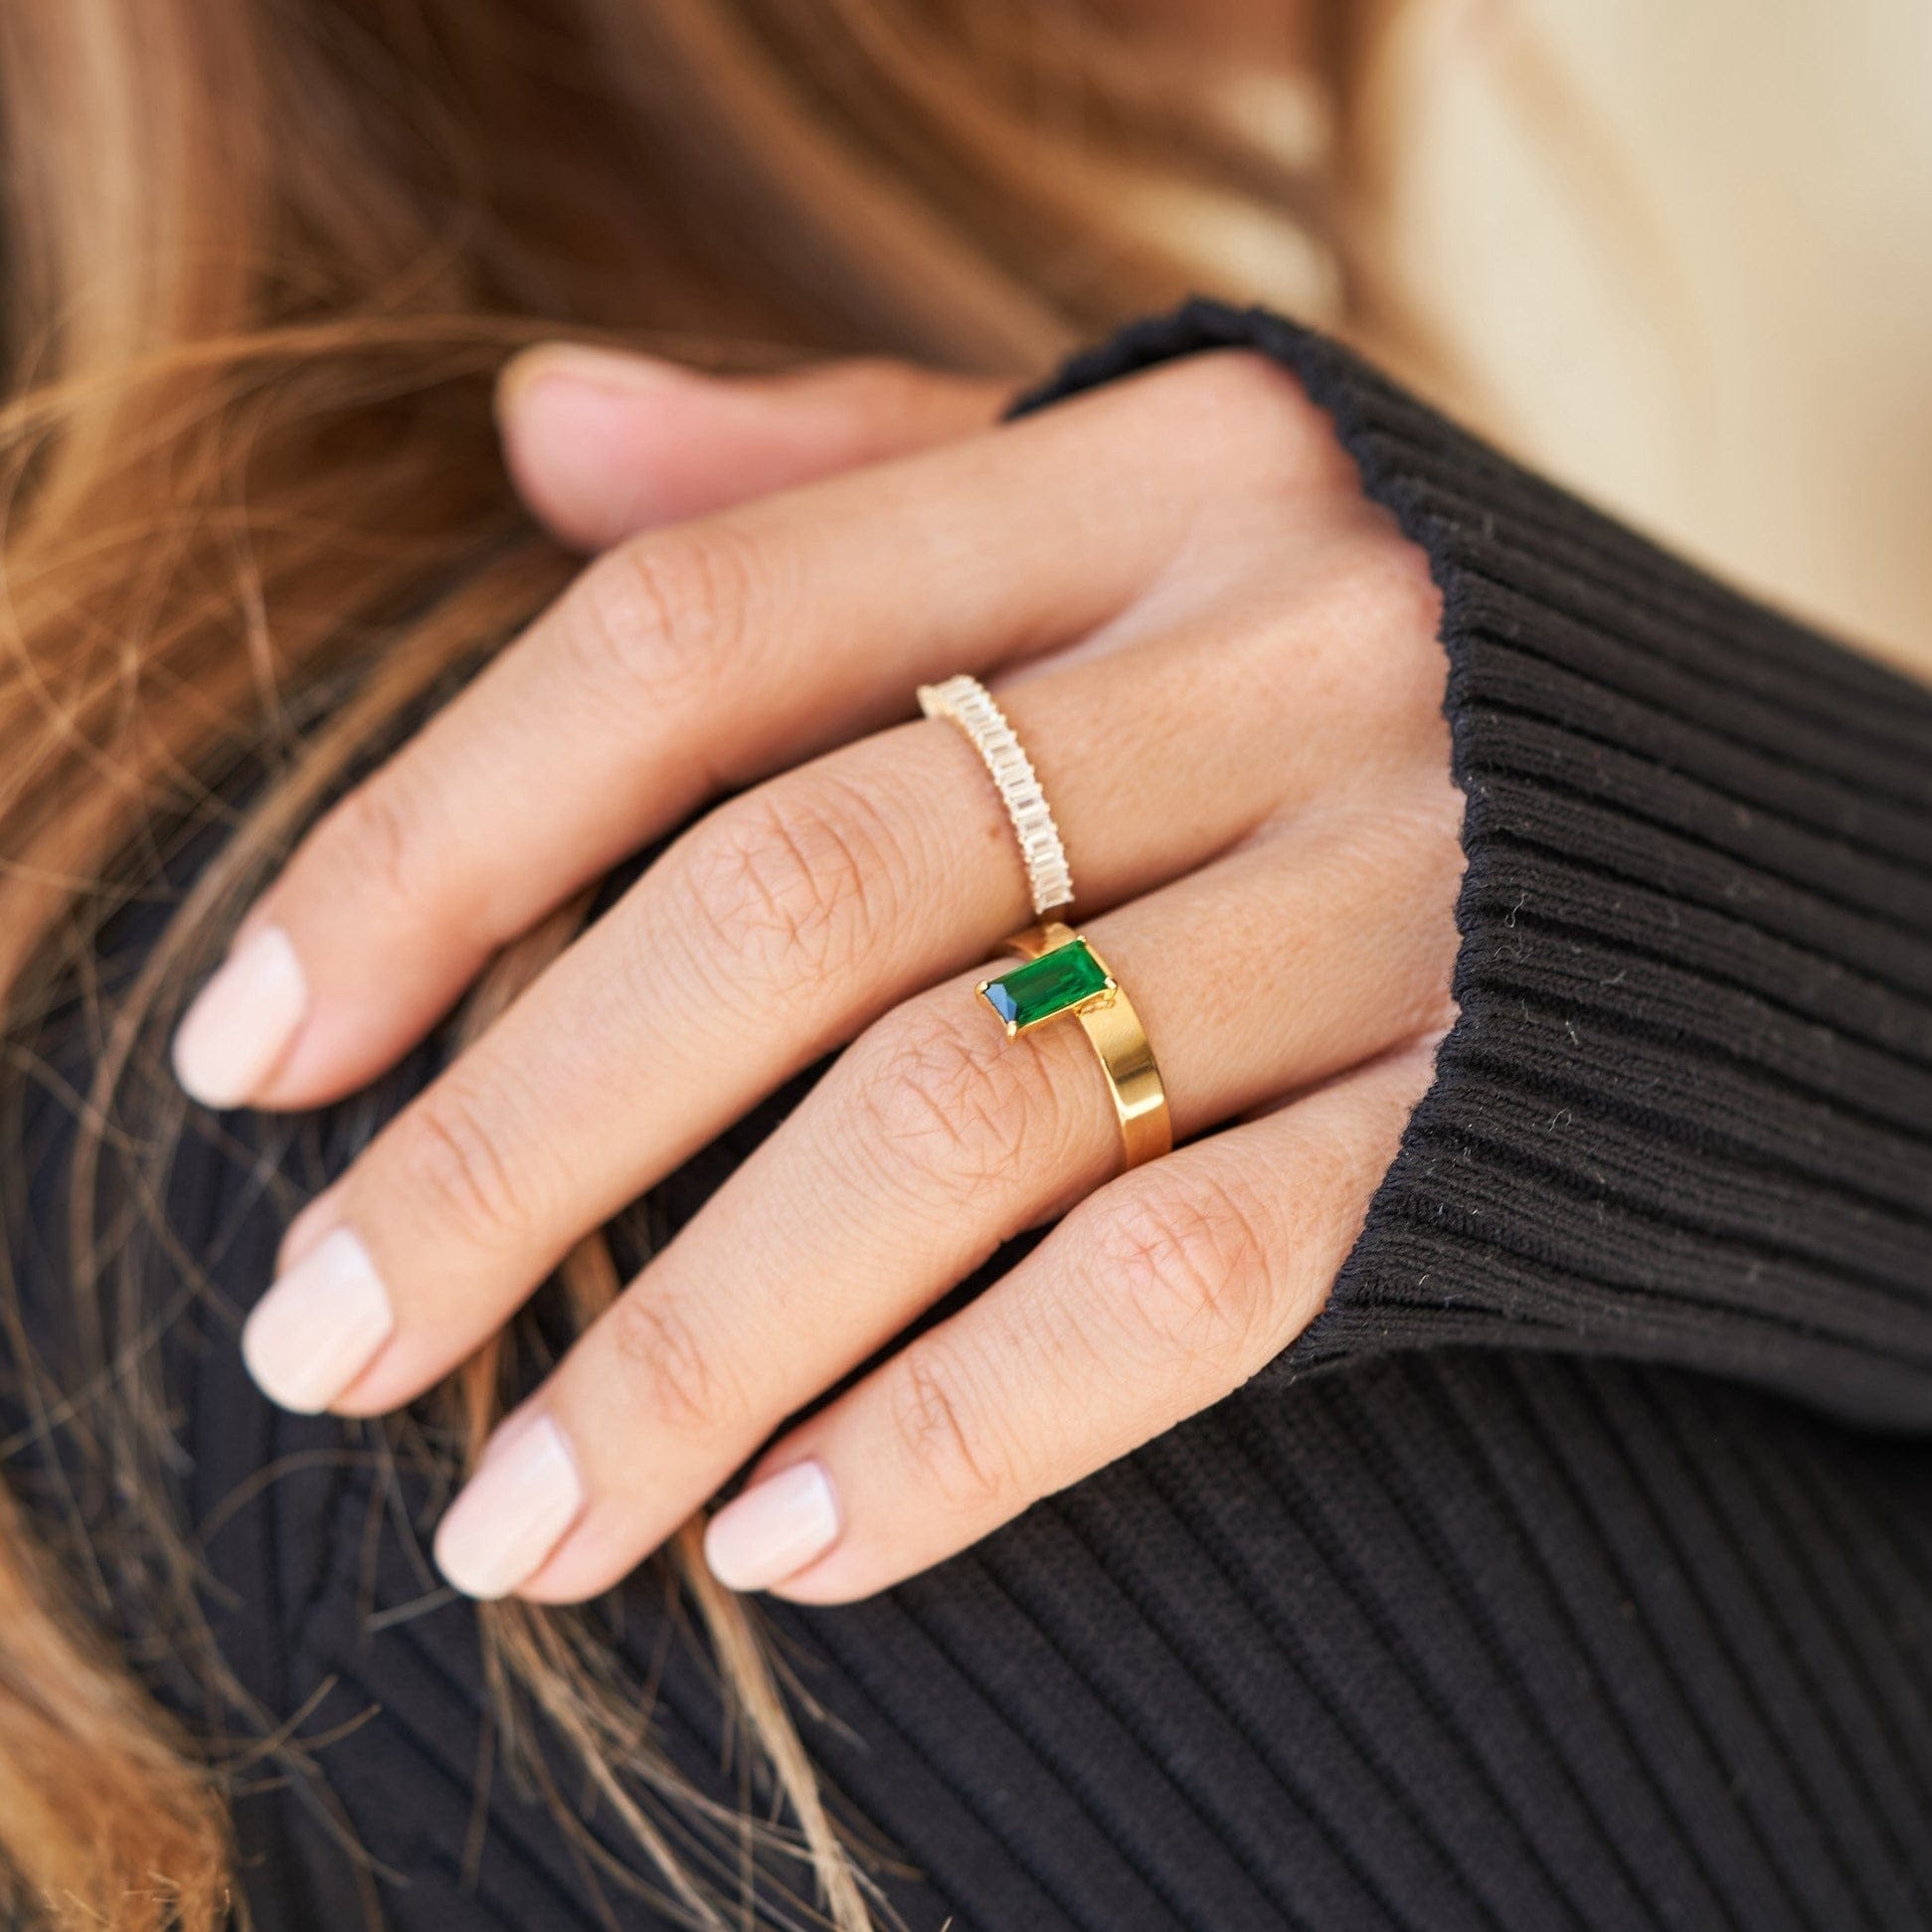 Stand Tall Emerald Ring Rings IceLink-RAN   